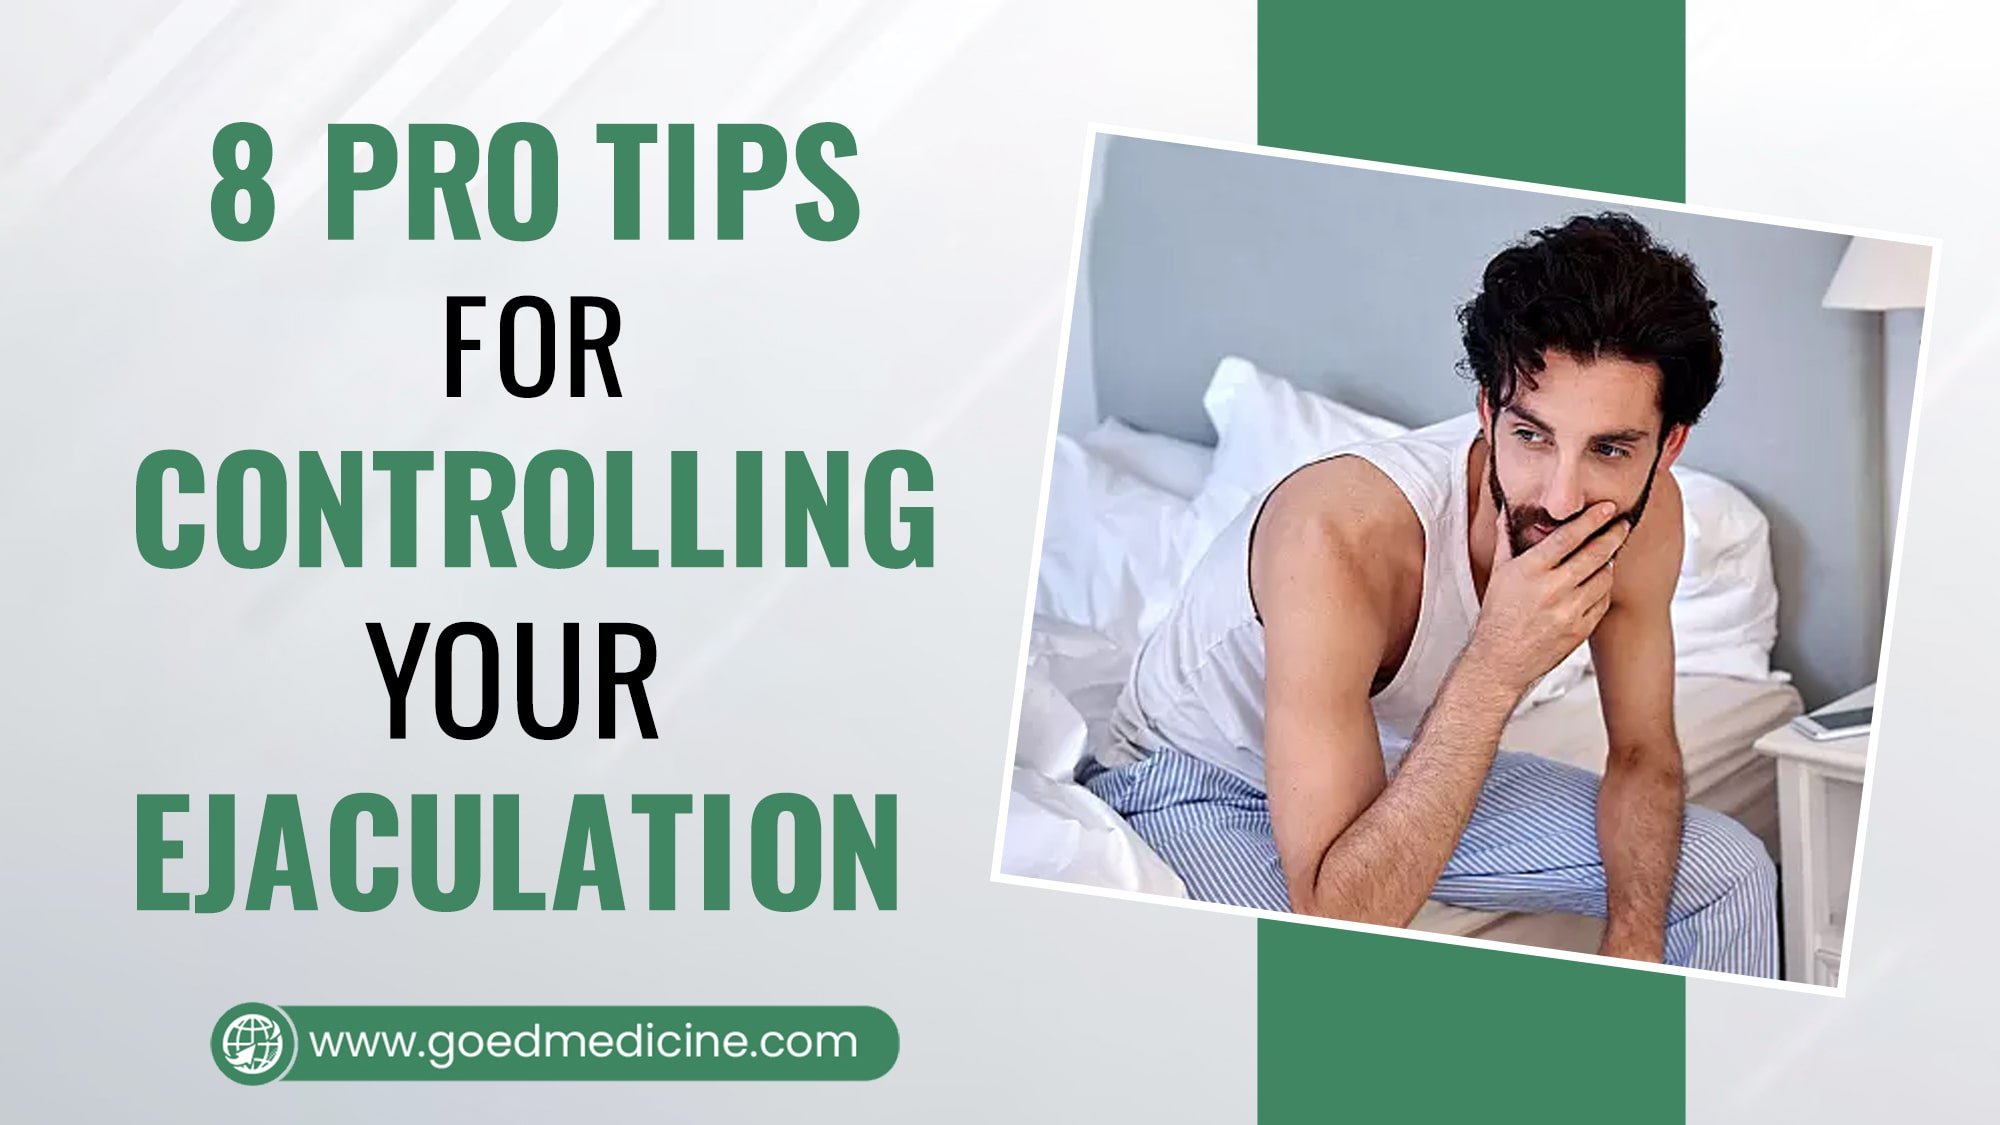 8 Pro Tips For Controlling Your Ejaculation